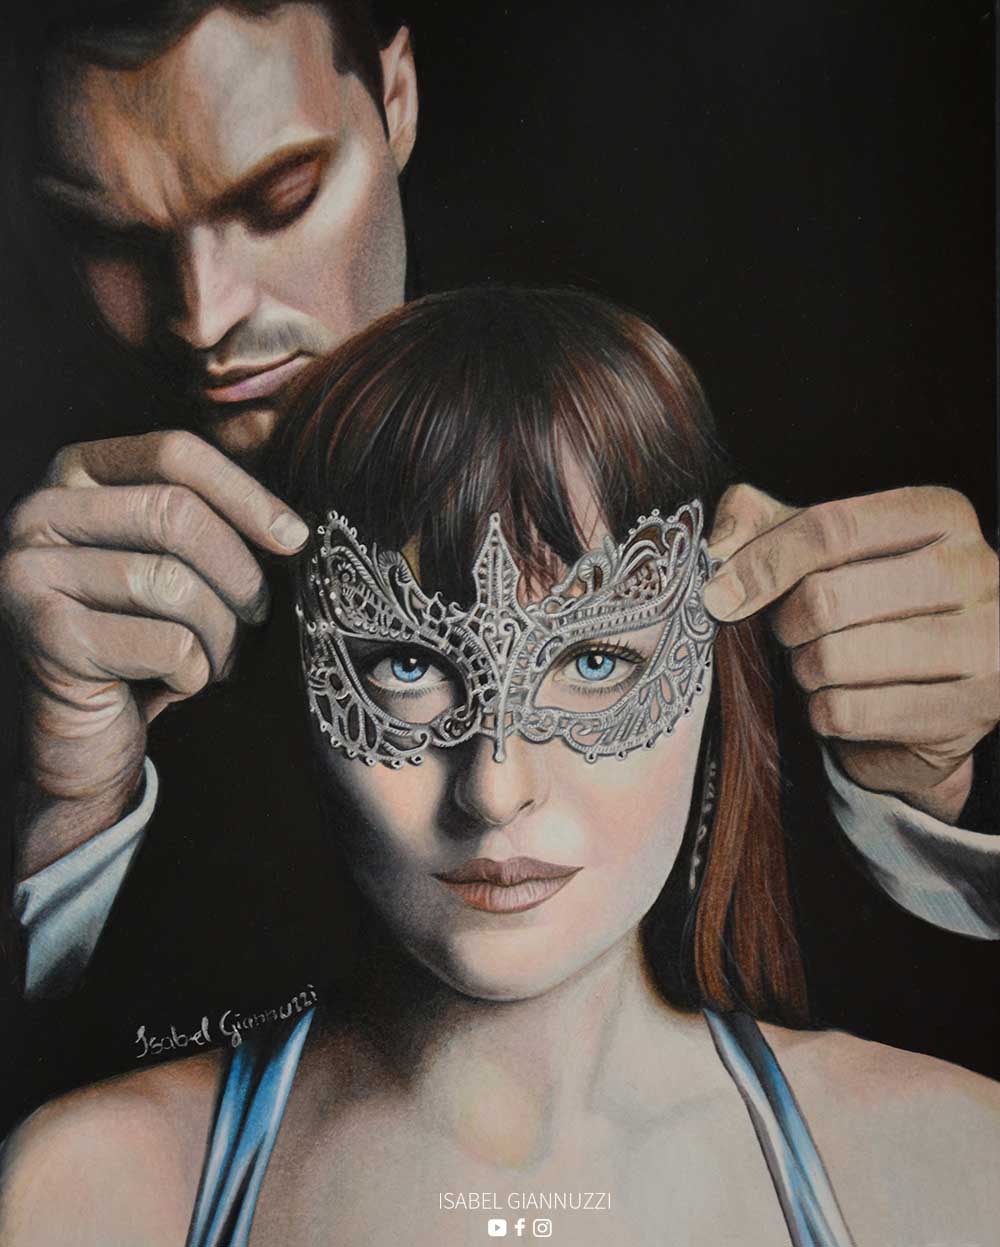 Drawing Fifty Shades Darker by Isabel Giannuzzi